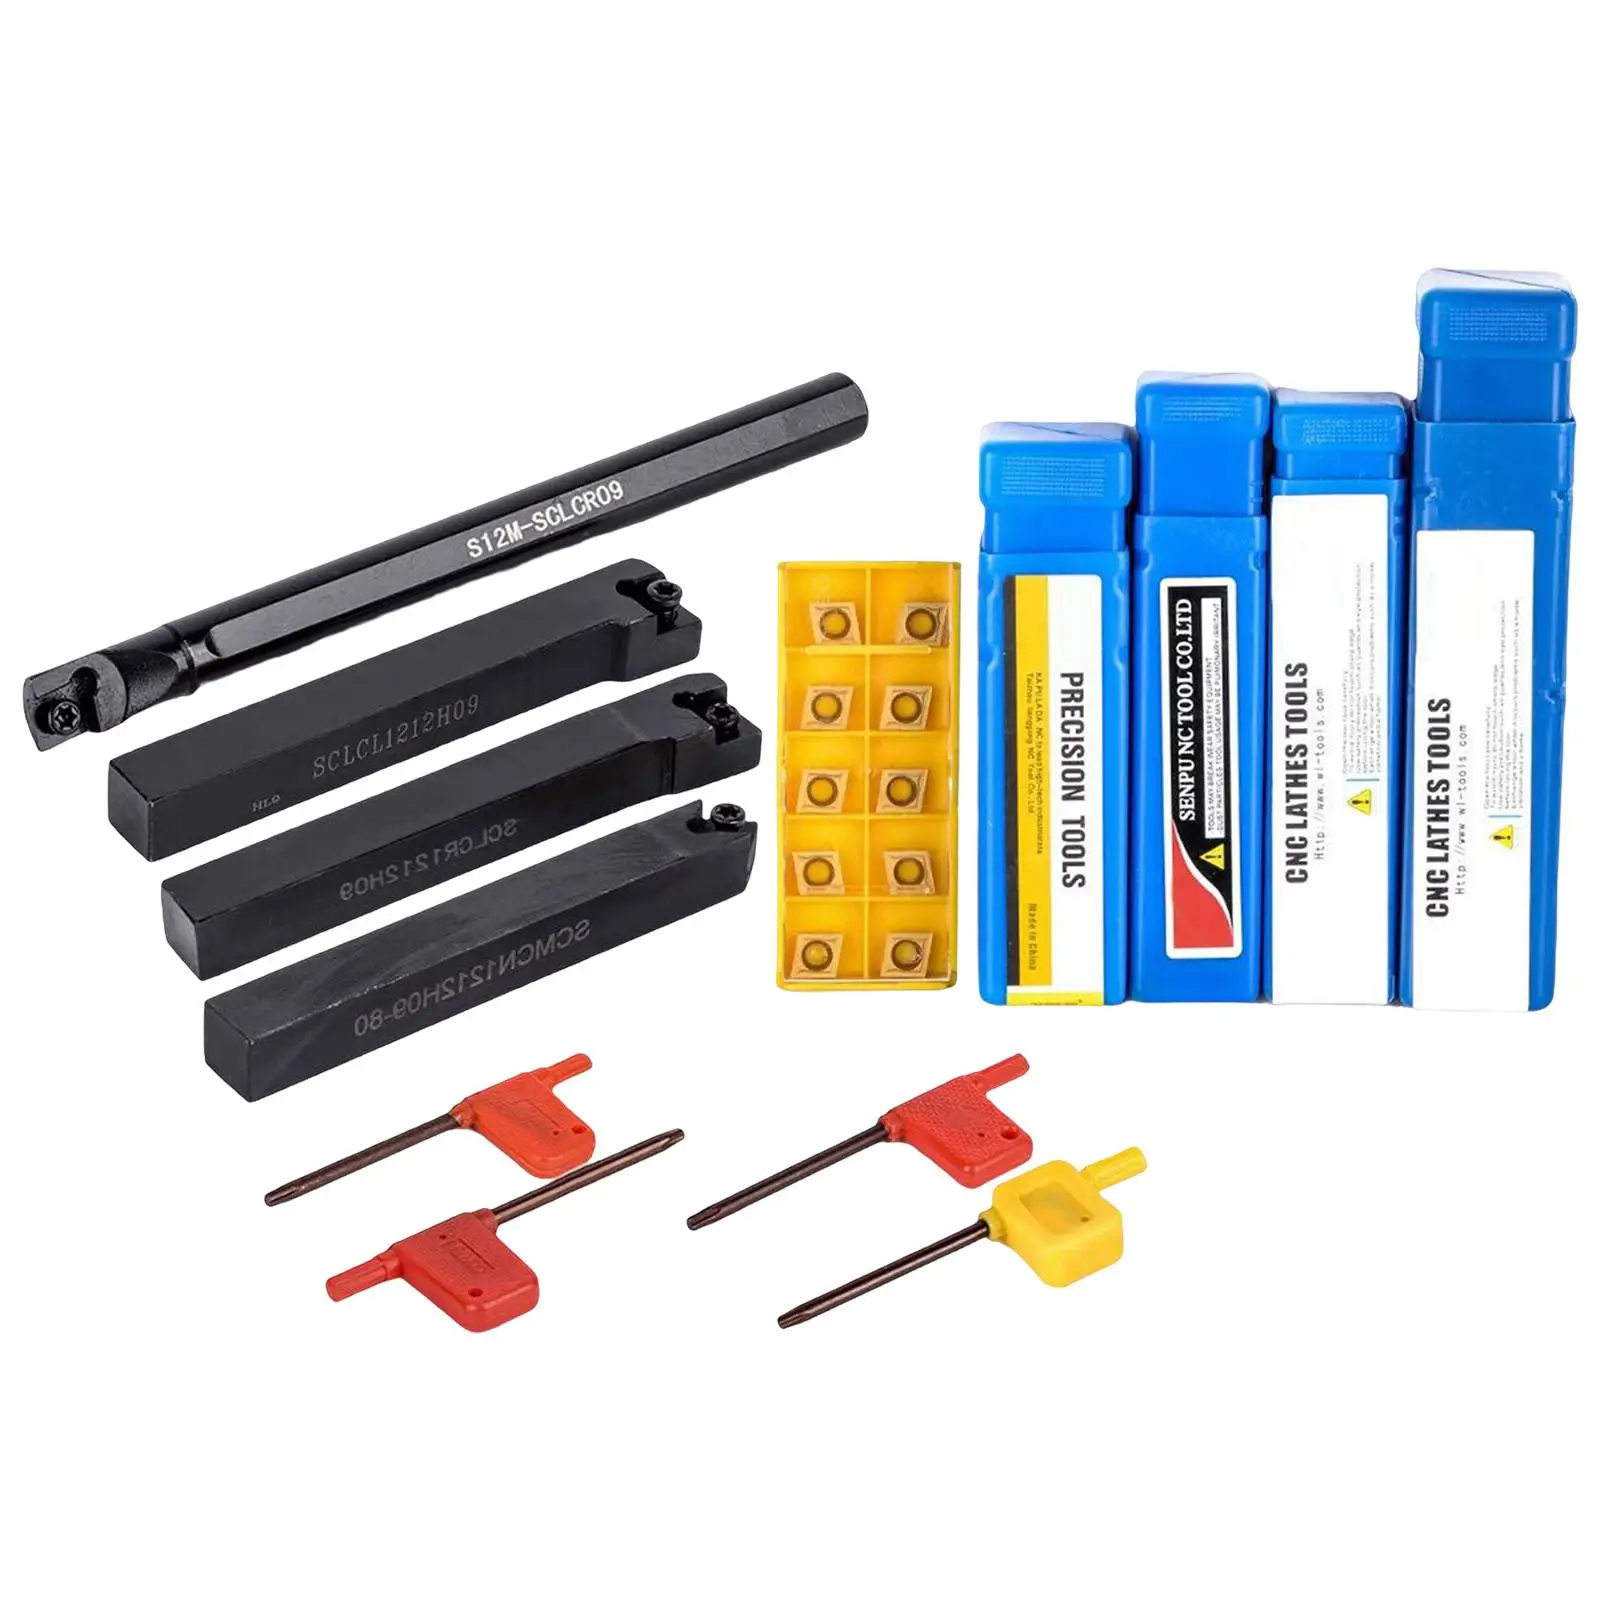 4 Pieces Lathe Boring Bar and 10Pcs Carbide Inserts Replacement Parts with 4Pcs Wrench Metal Turning Tools Holder Sclcr1212H09